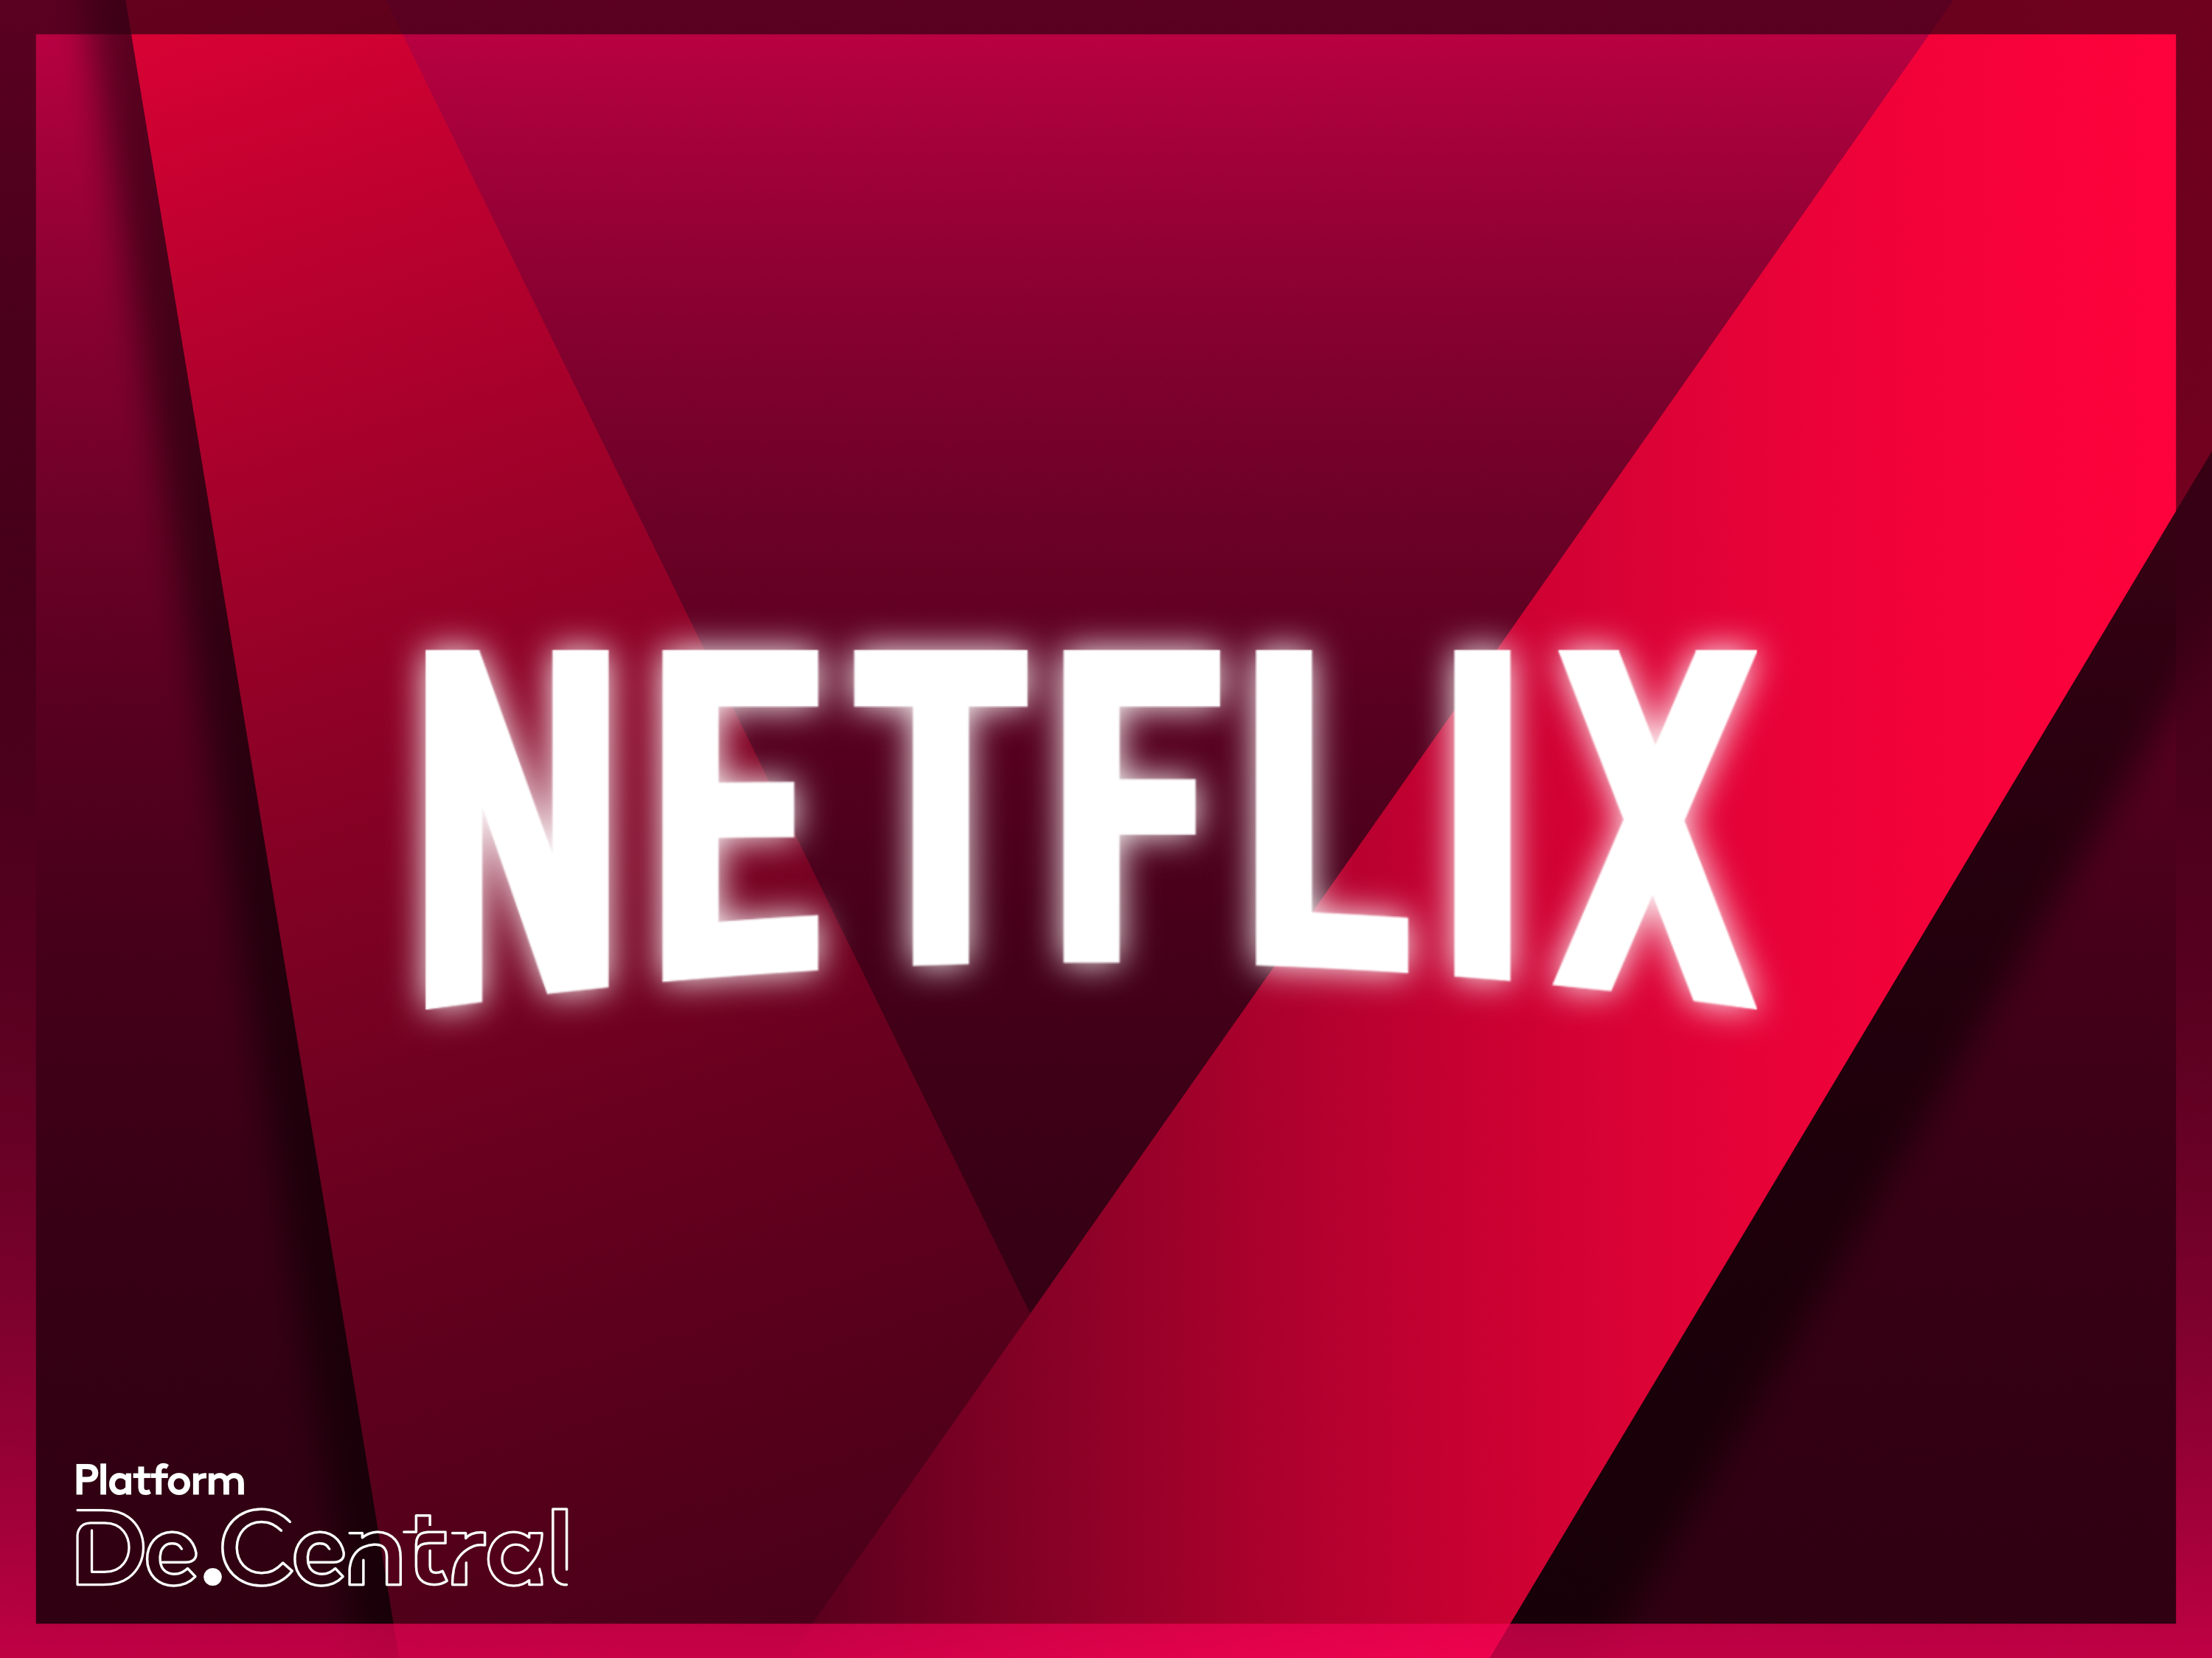 Netflix adds ‘Screen Lock’ button to its Android App